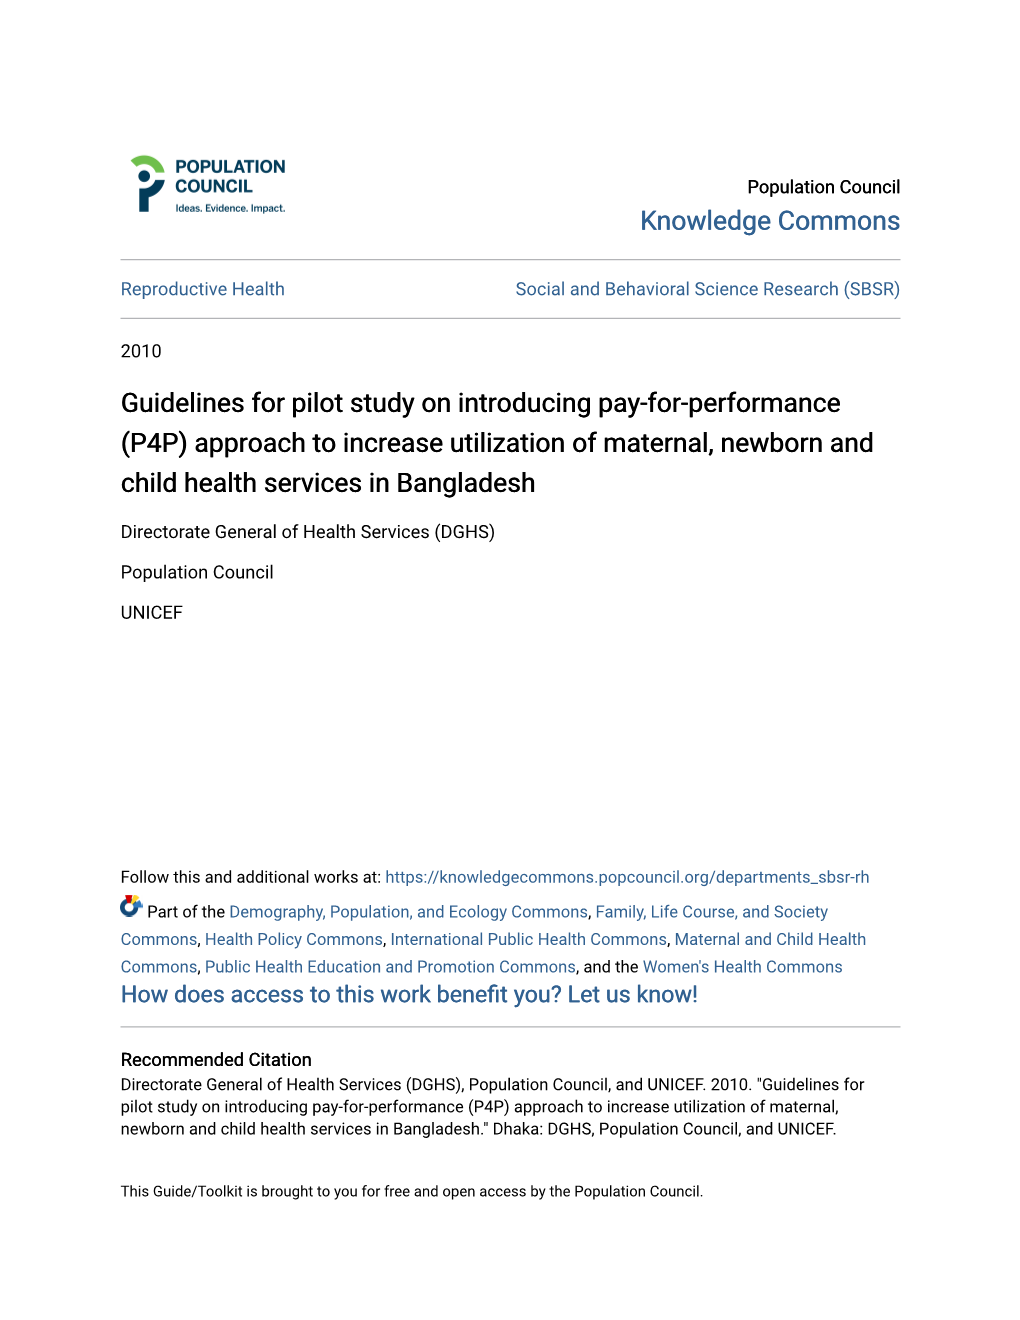 Guidelines for Pilot Study on Introducing Pay-For-Performance (P4P) Approach to Increase Utilization of Maternal, Newborn and Child Health Services in Bangladesh